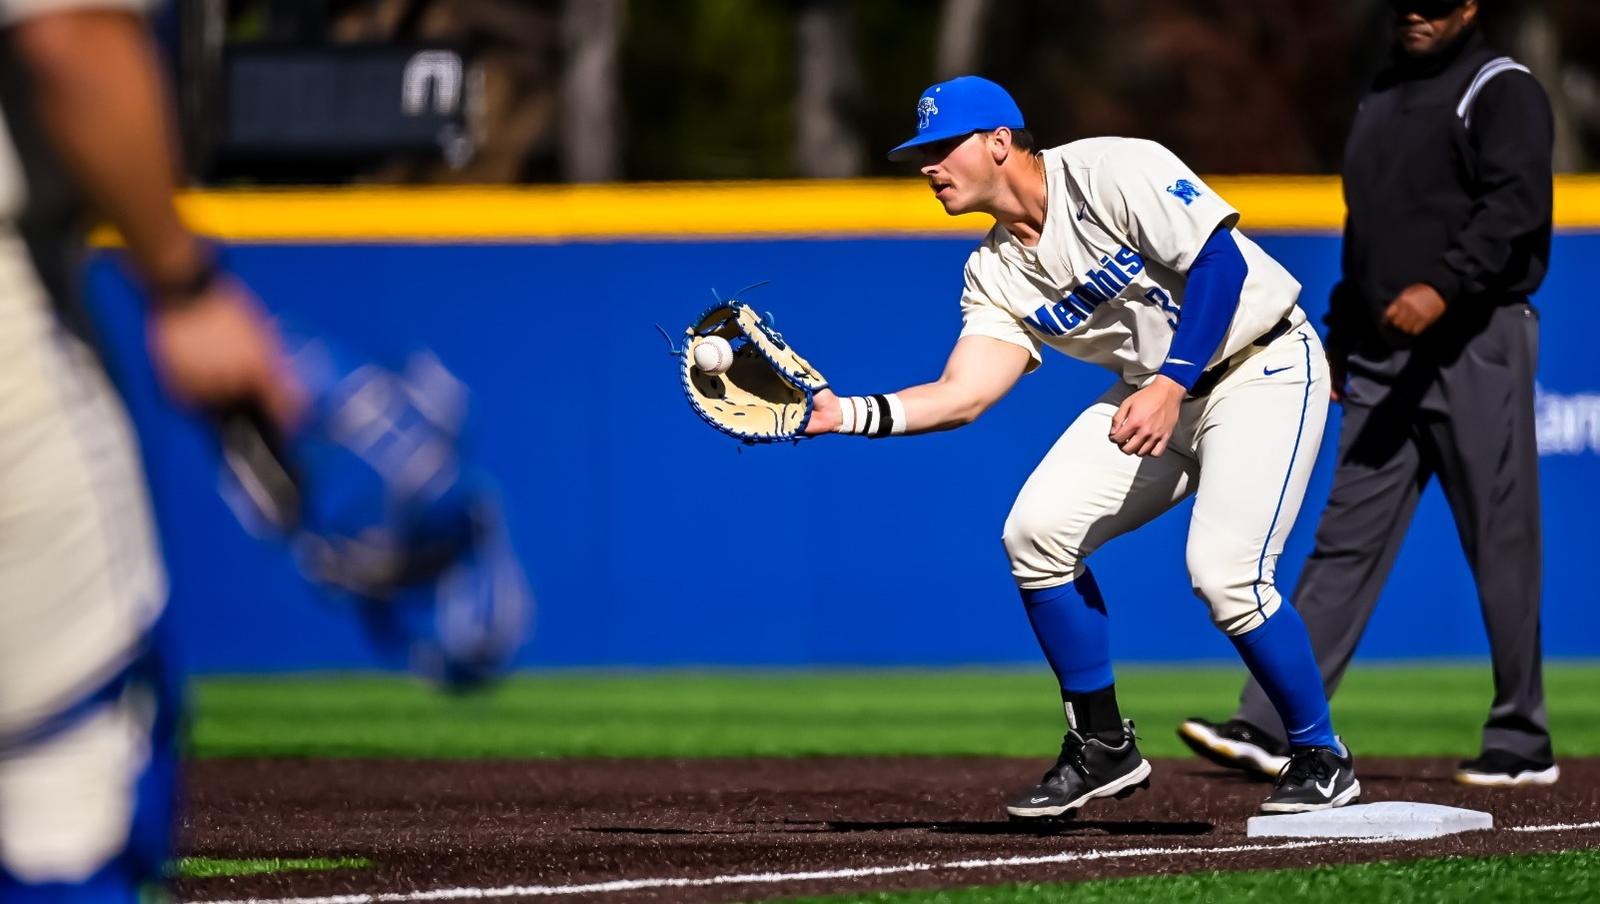 University of Memphis Falls to No. 7 East Carolina 14-3 in Game Two